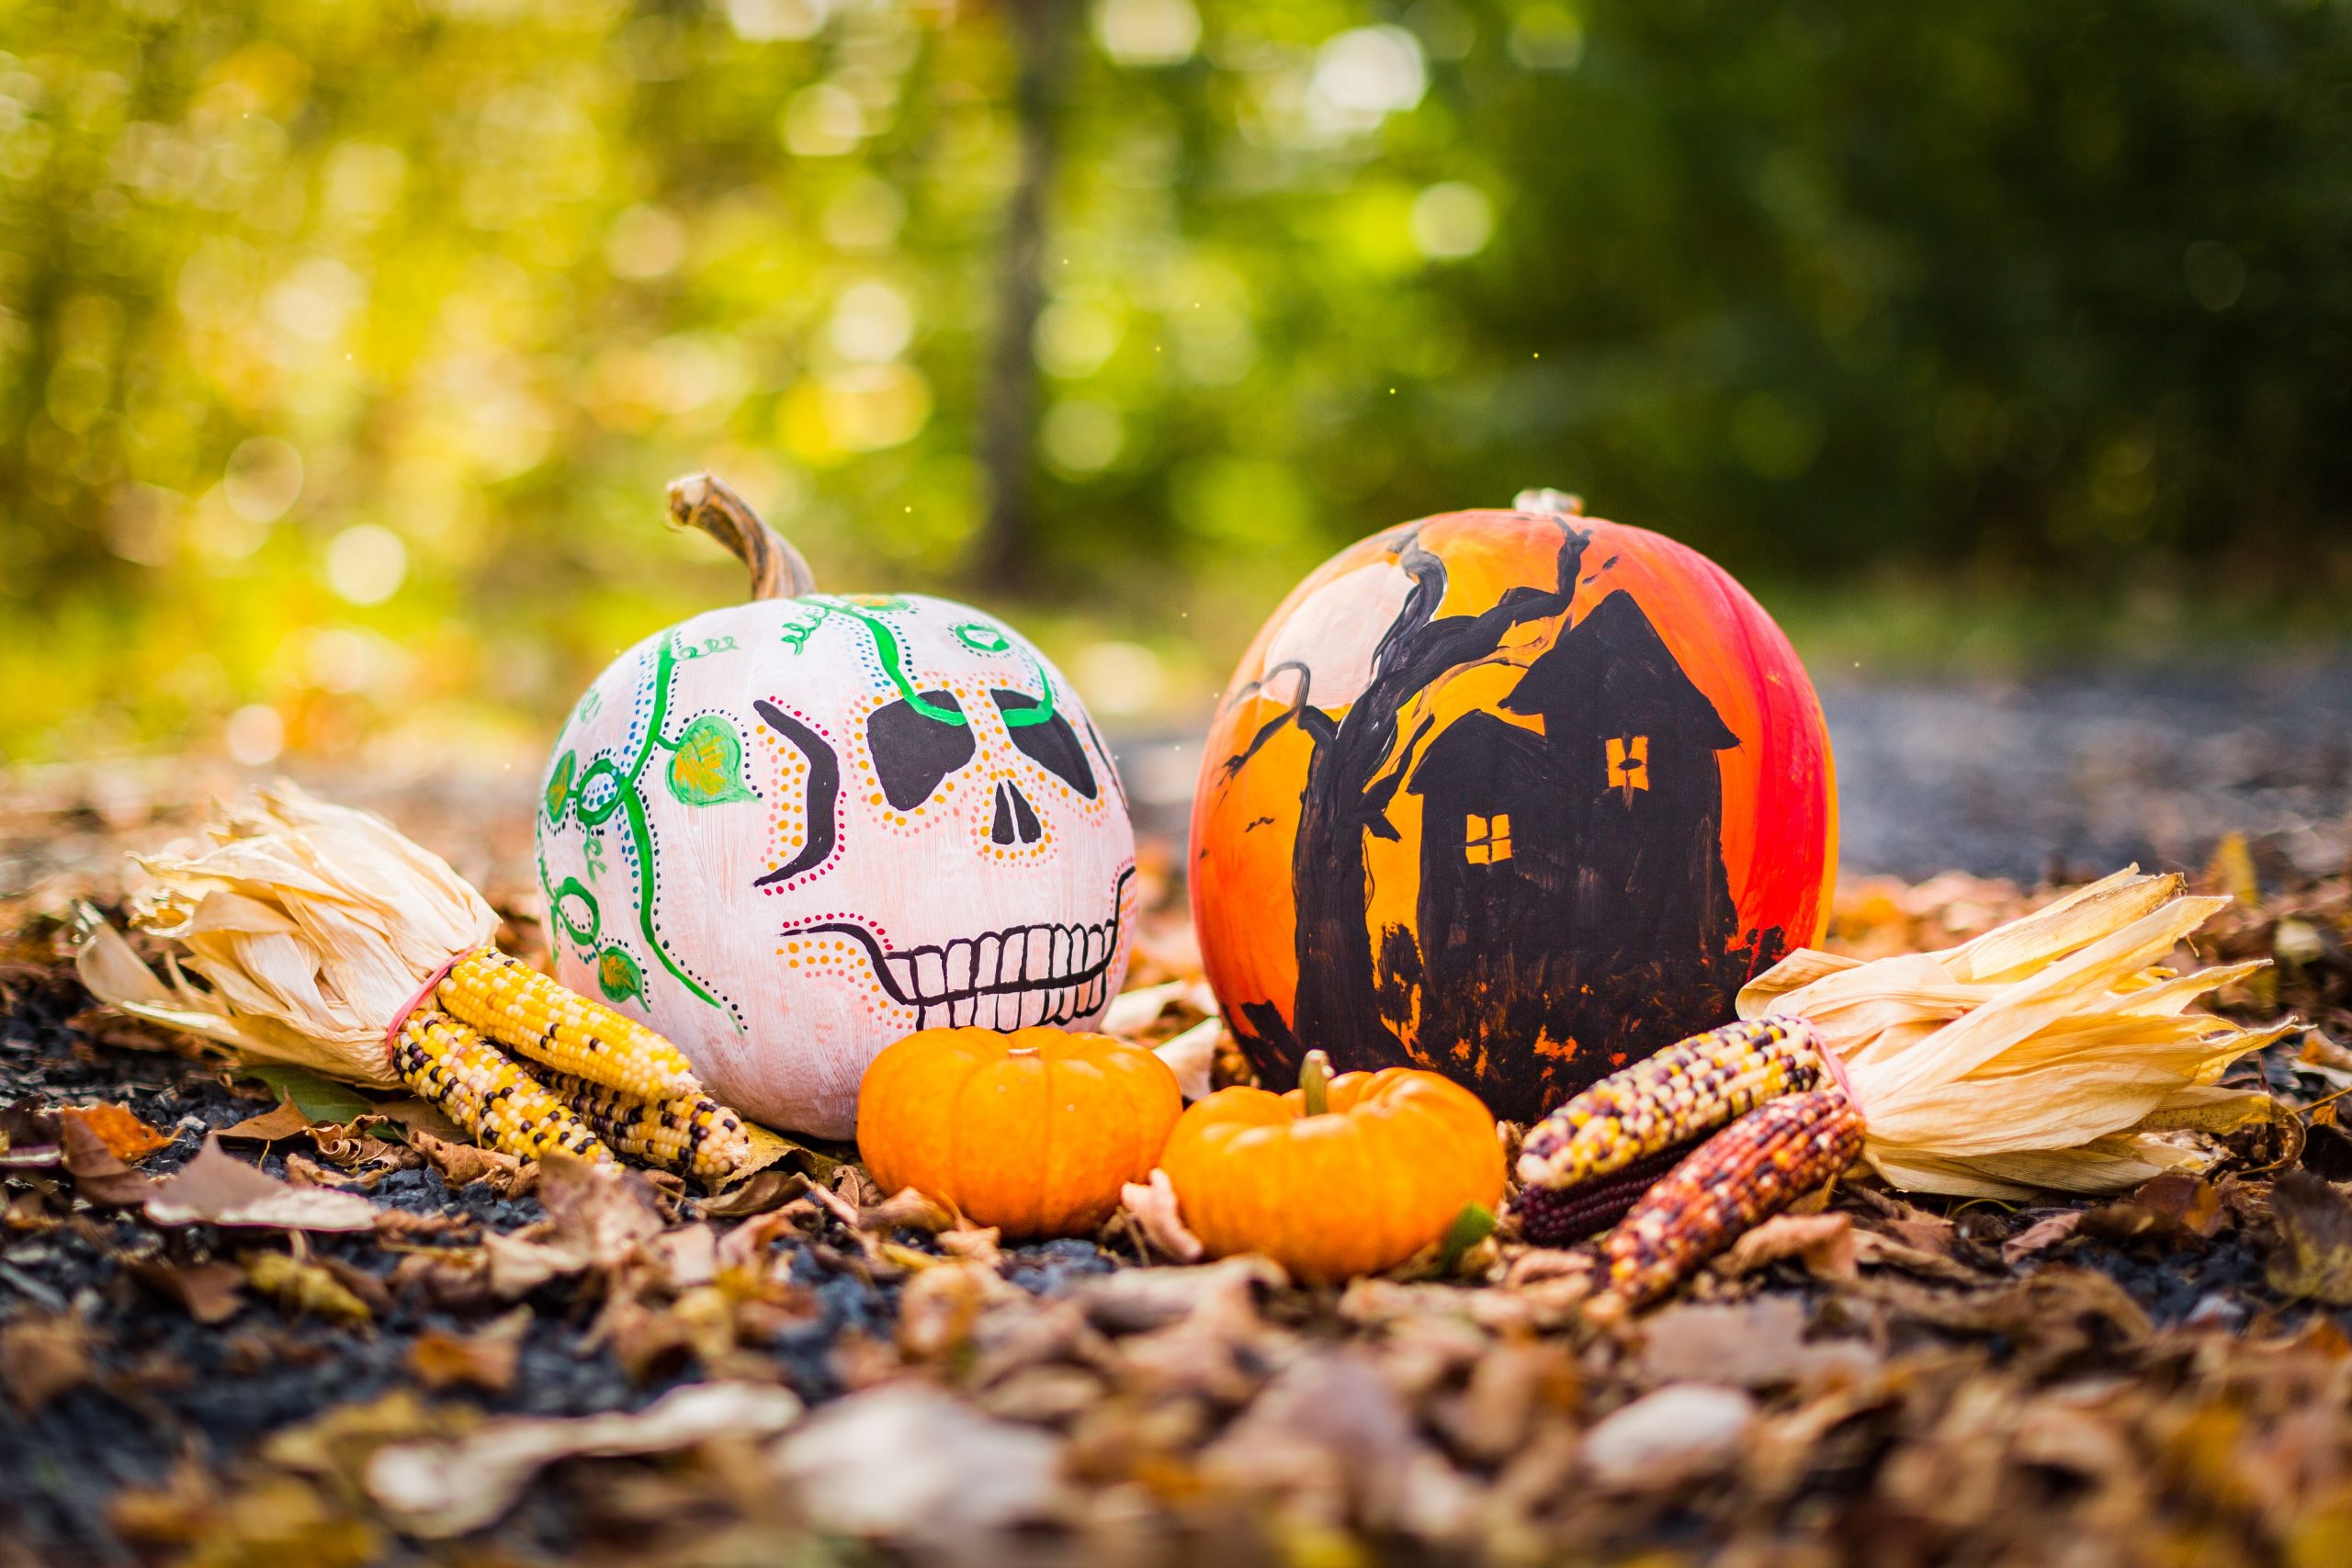 a pumpkin painted as a skeleton beside a pumpkin with a haunted house painted on it surrounded by tiny squashes